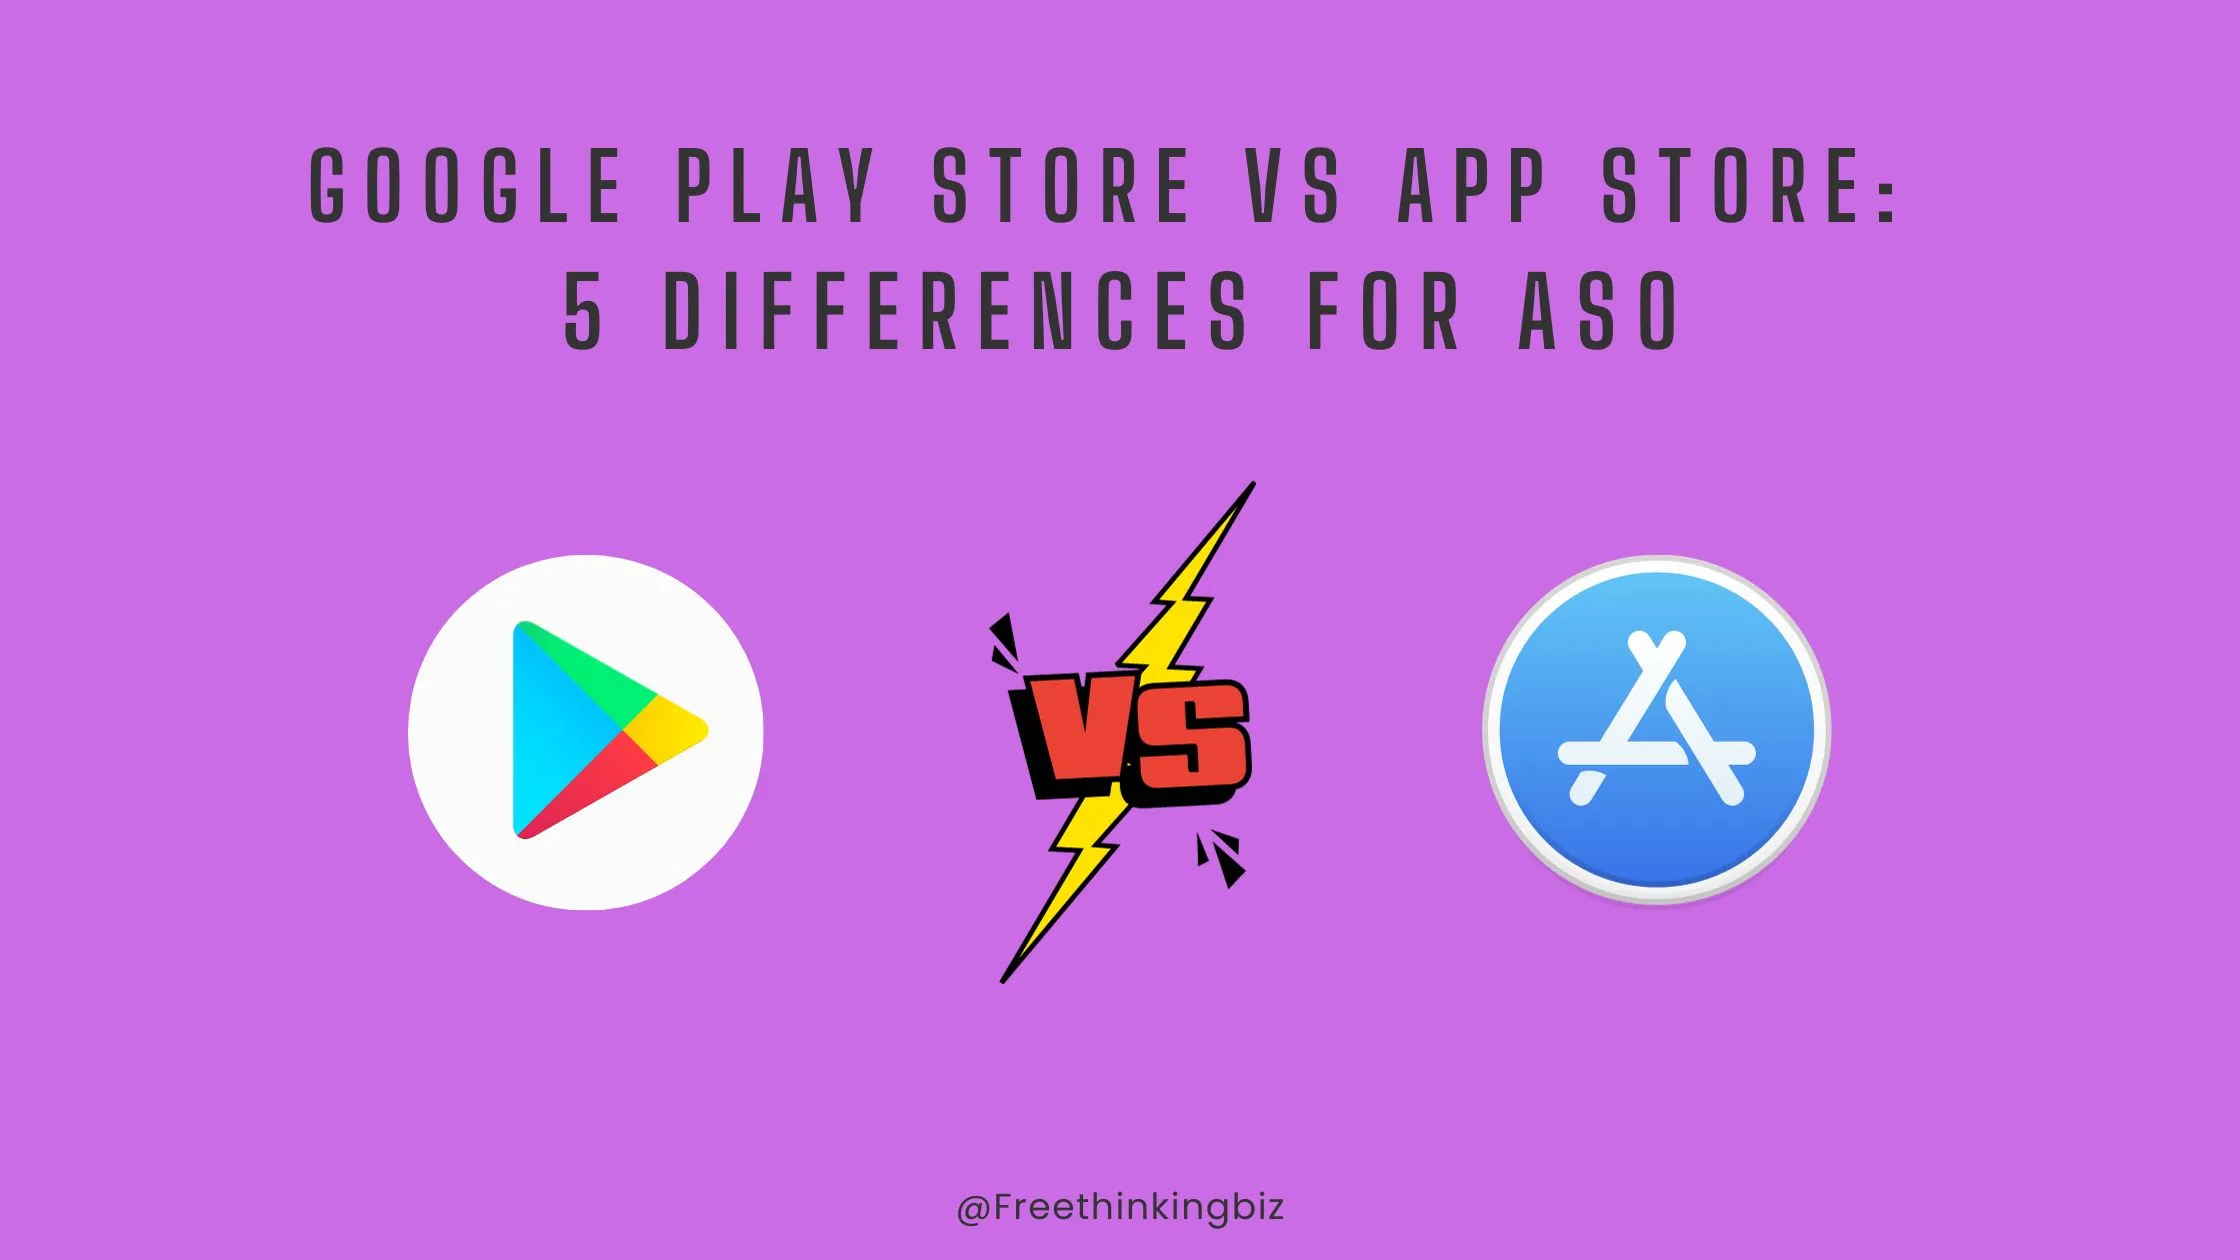 Google Play Store VS App Store: 5 Differences for better ASO